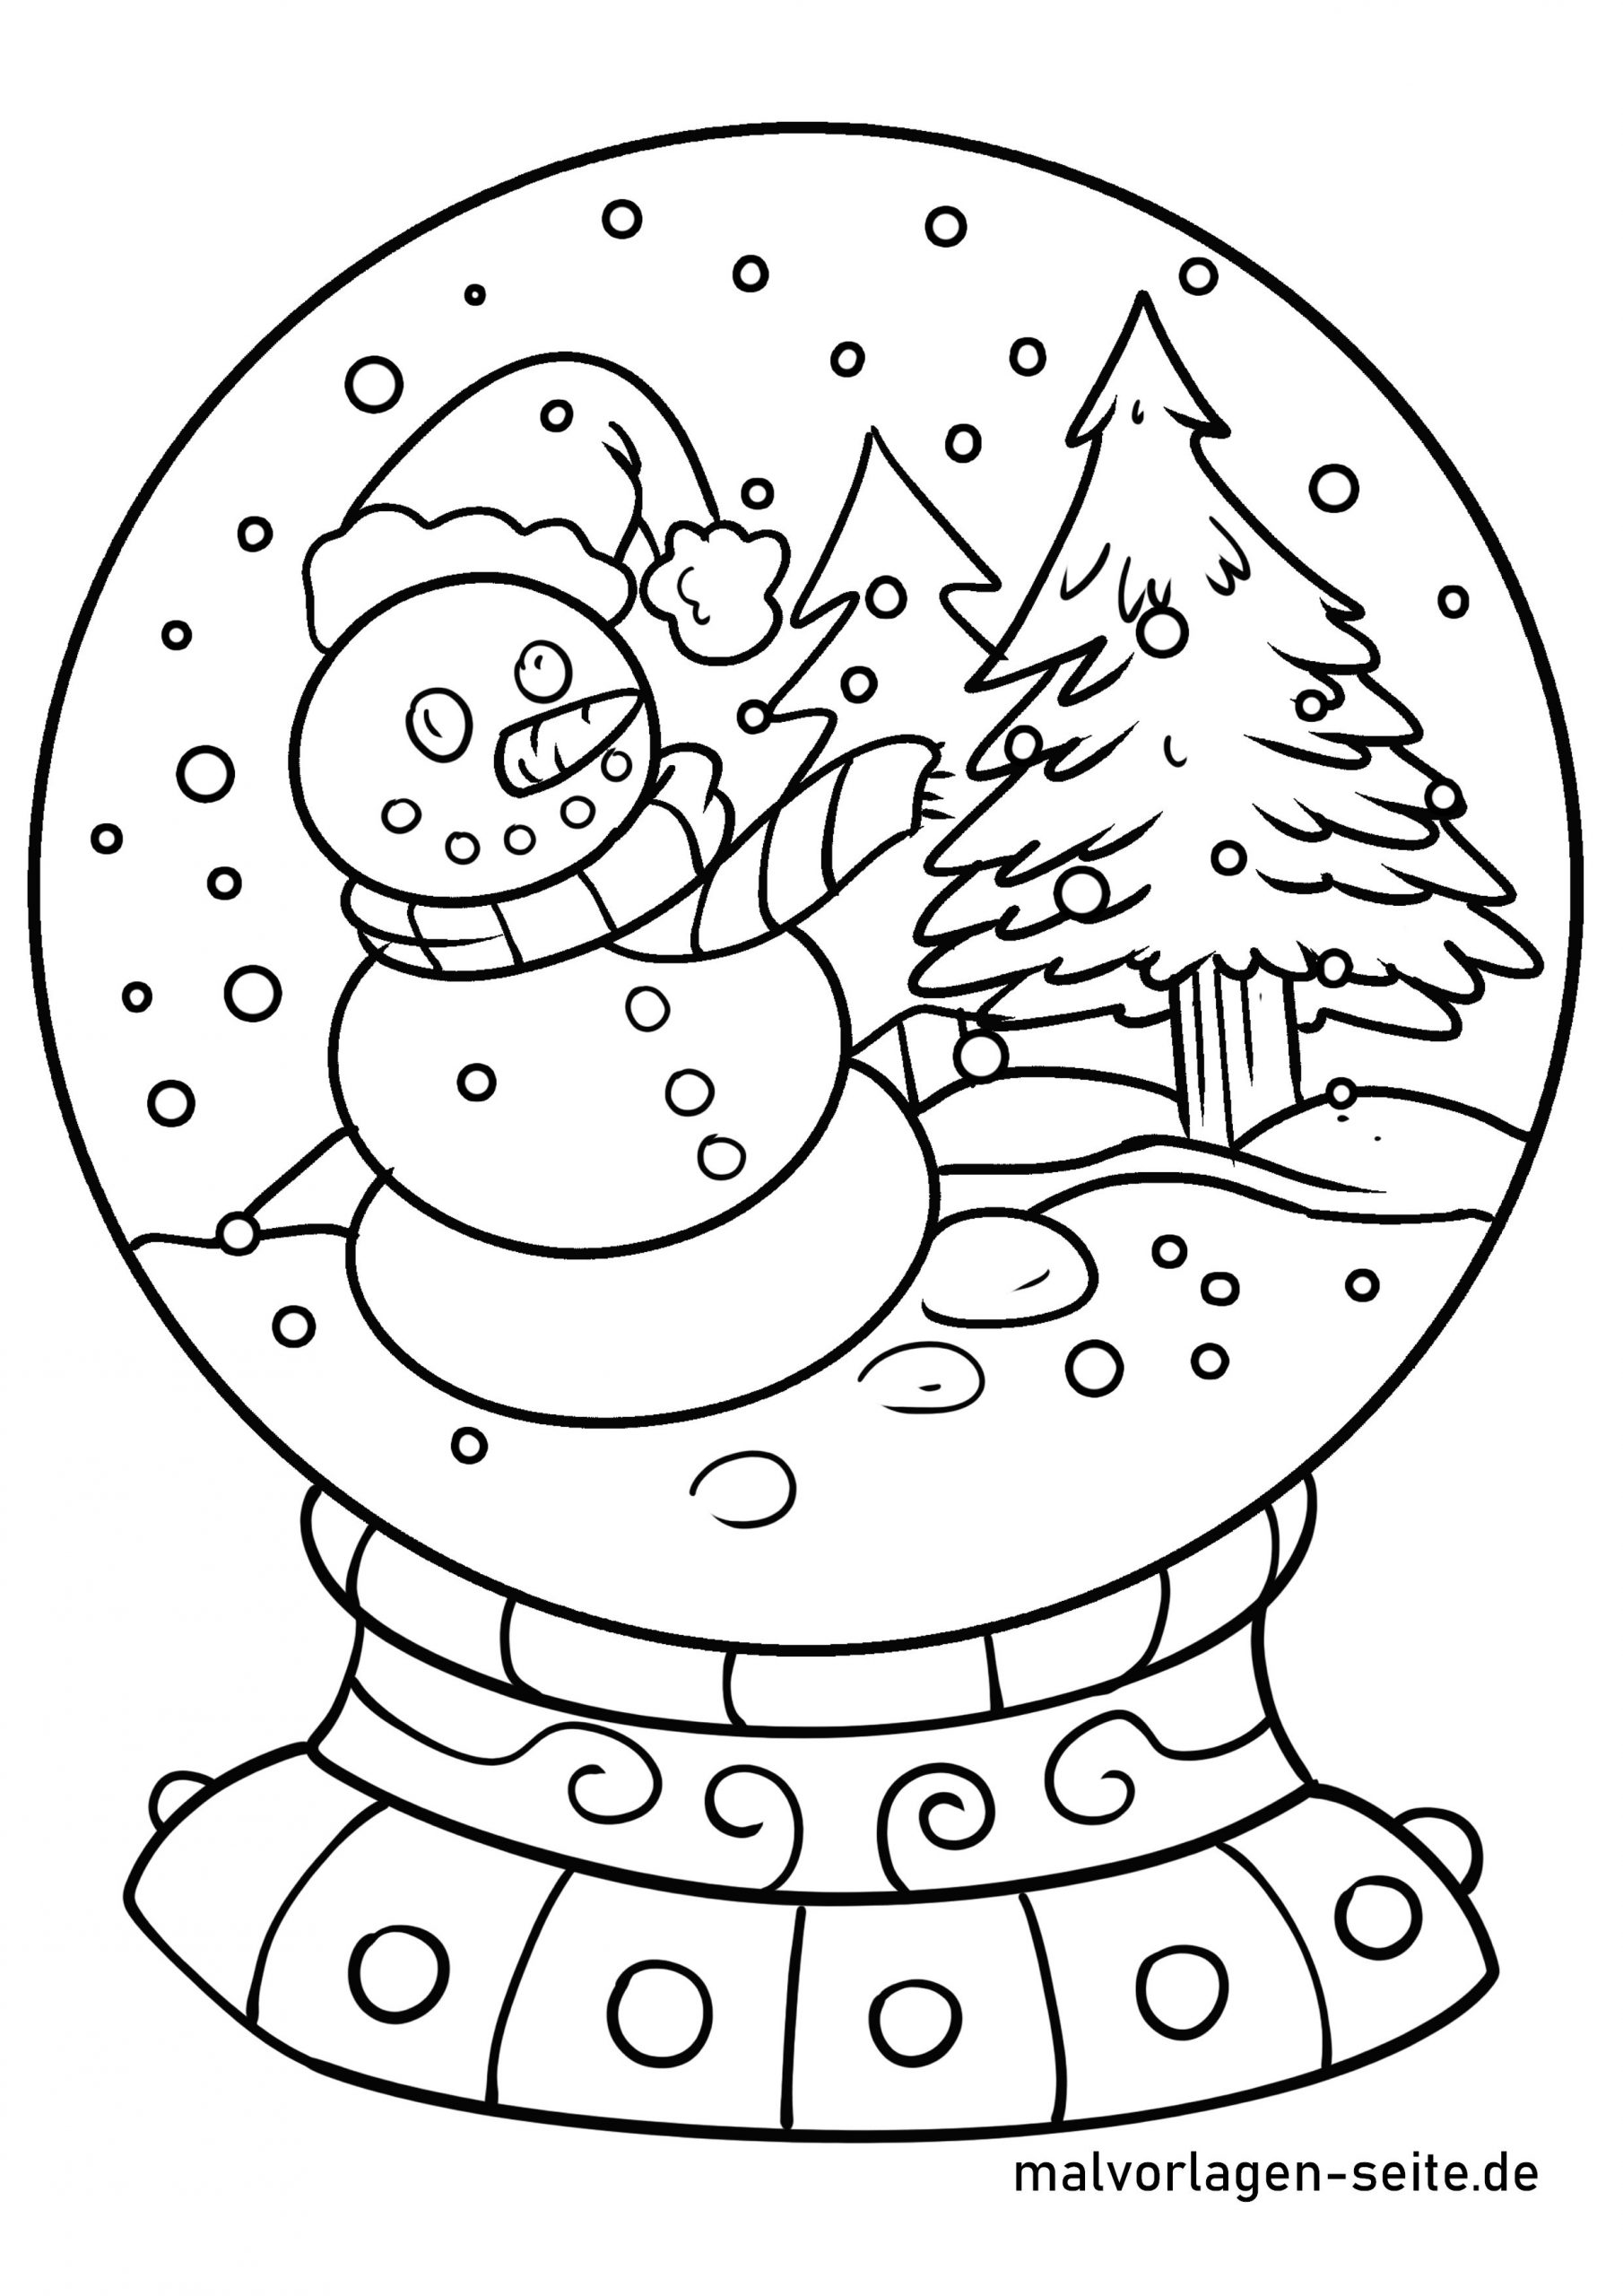 Printable Winter Coloring Pages | vlr.eng.br